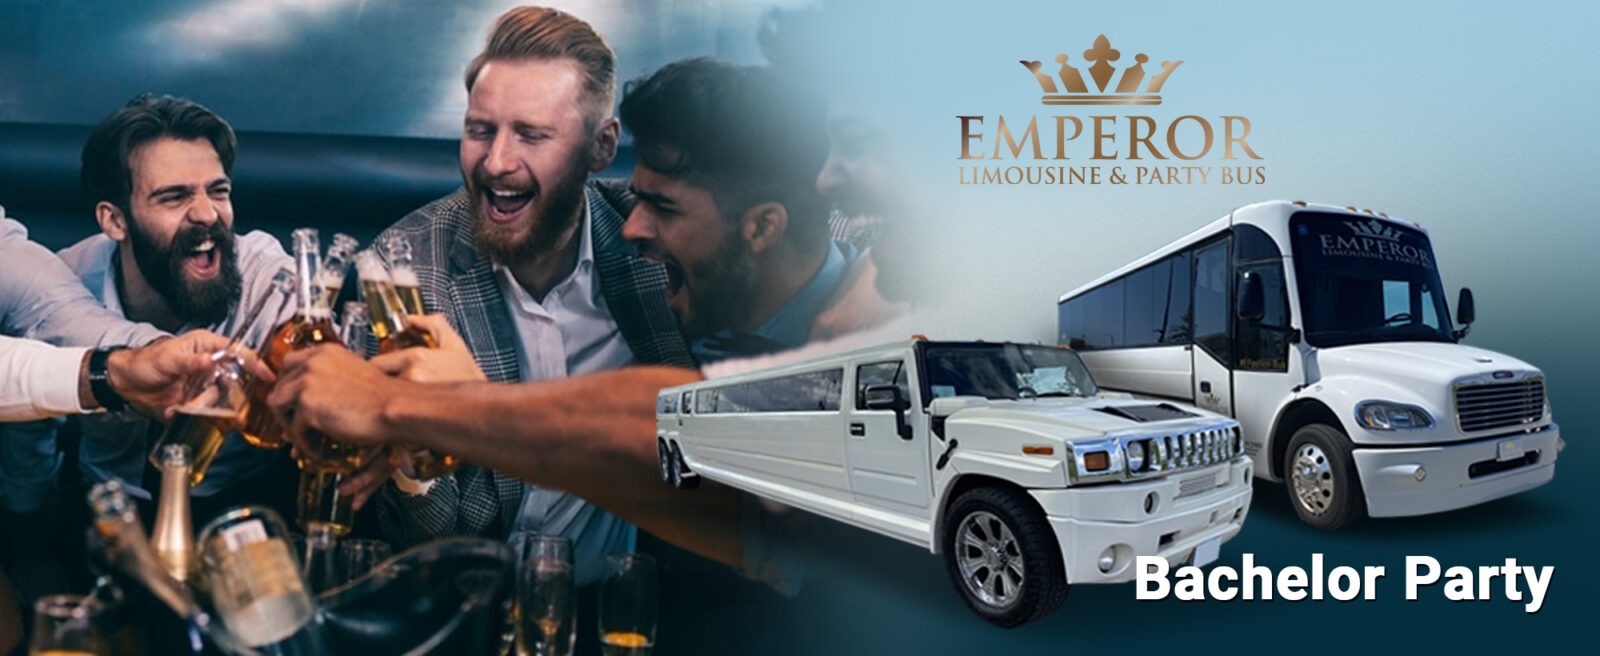 Trust Emperor for an amazing night out on the town with our party buses and limos